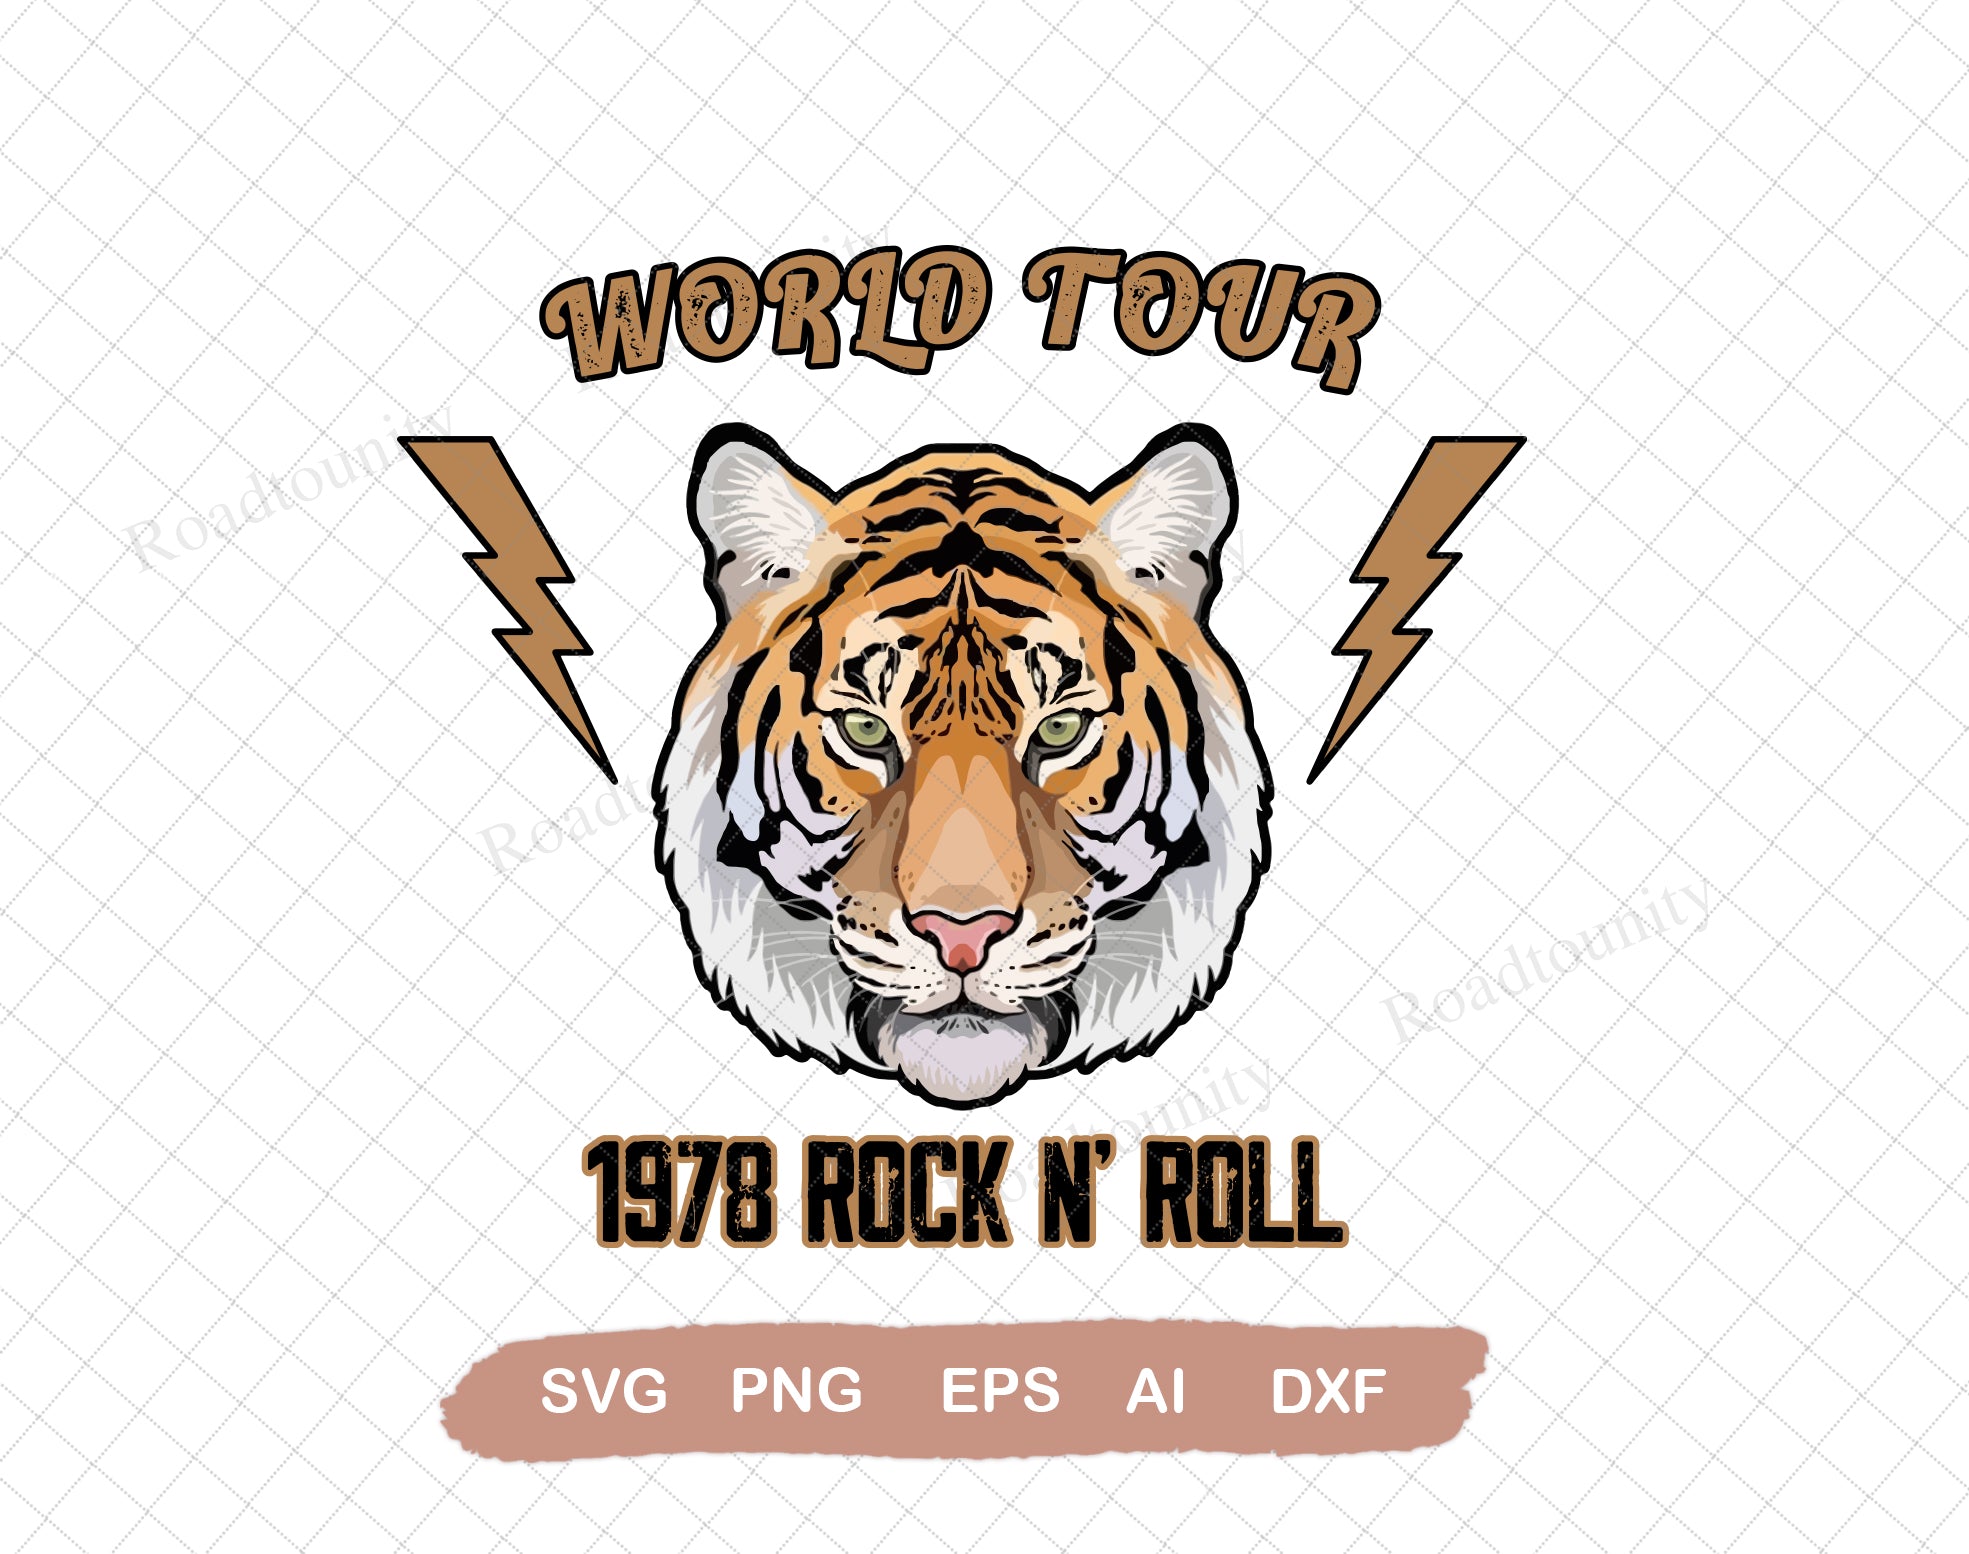 FREE Vintage Tiger Layered SVG For Cricut, Cameo Silhouette